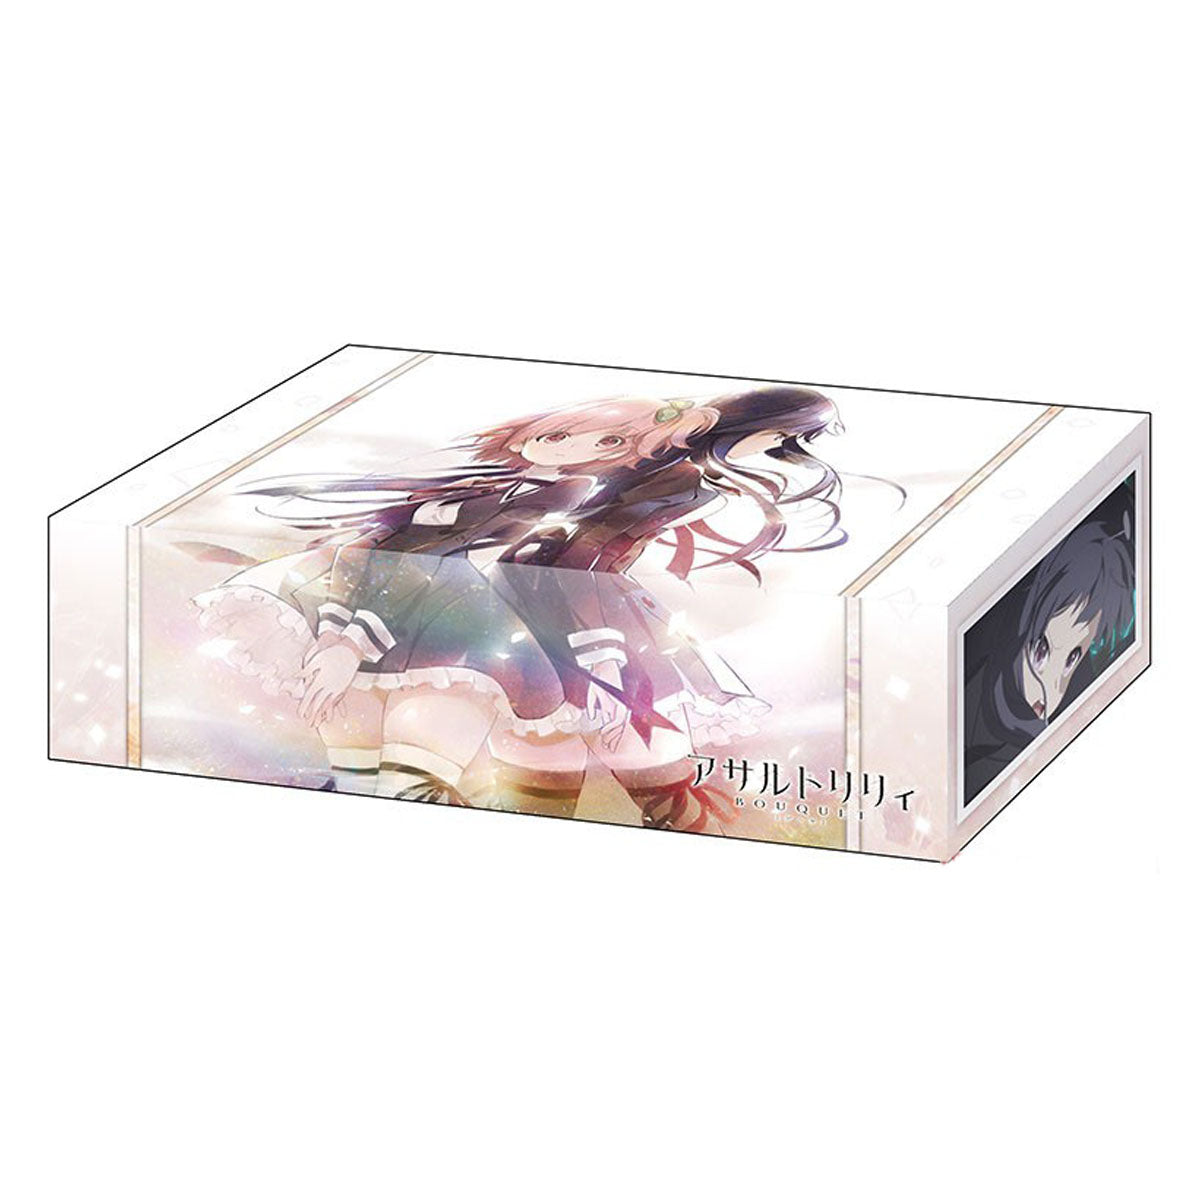 Assault Lily Bouquet Storage Box Collection V2 [Vol.77] &quot;Riri &amp; Yuyu&quot;-Bushiroad-Ace Cards &amp; Collectibles